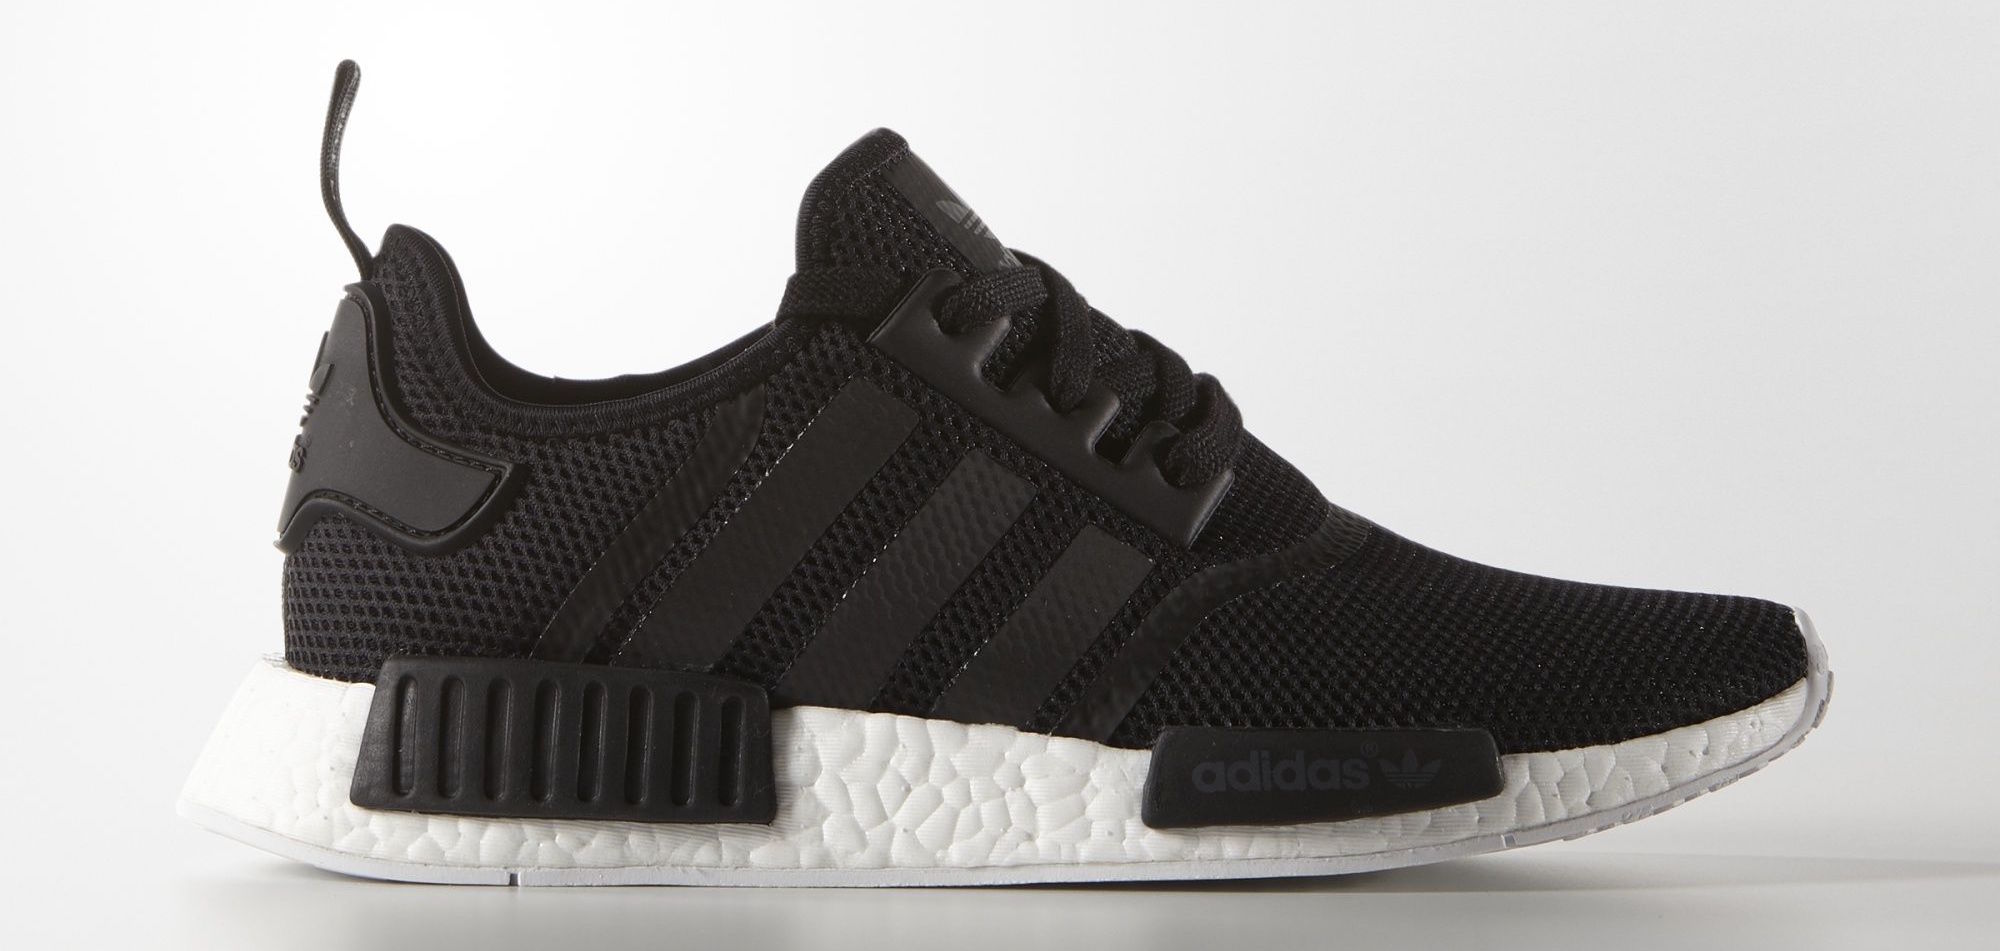 The adidas NMD R1 Runner is Available 